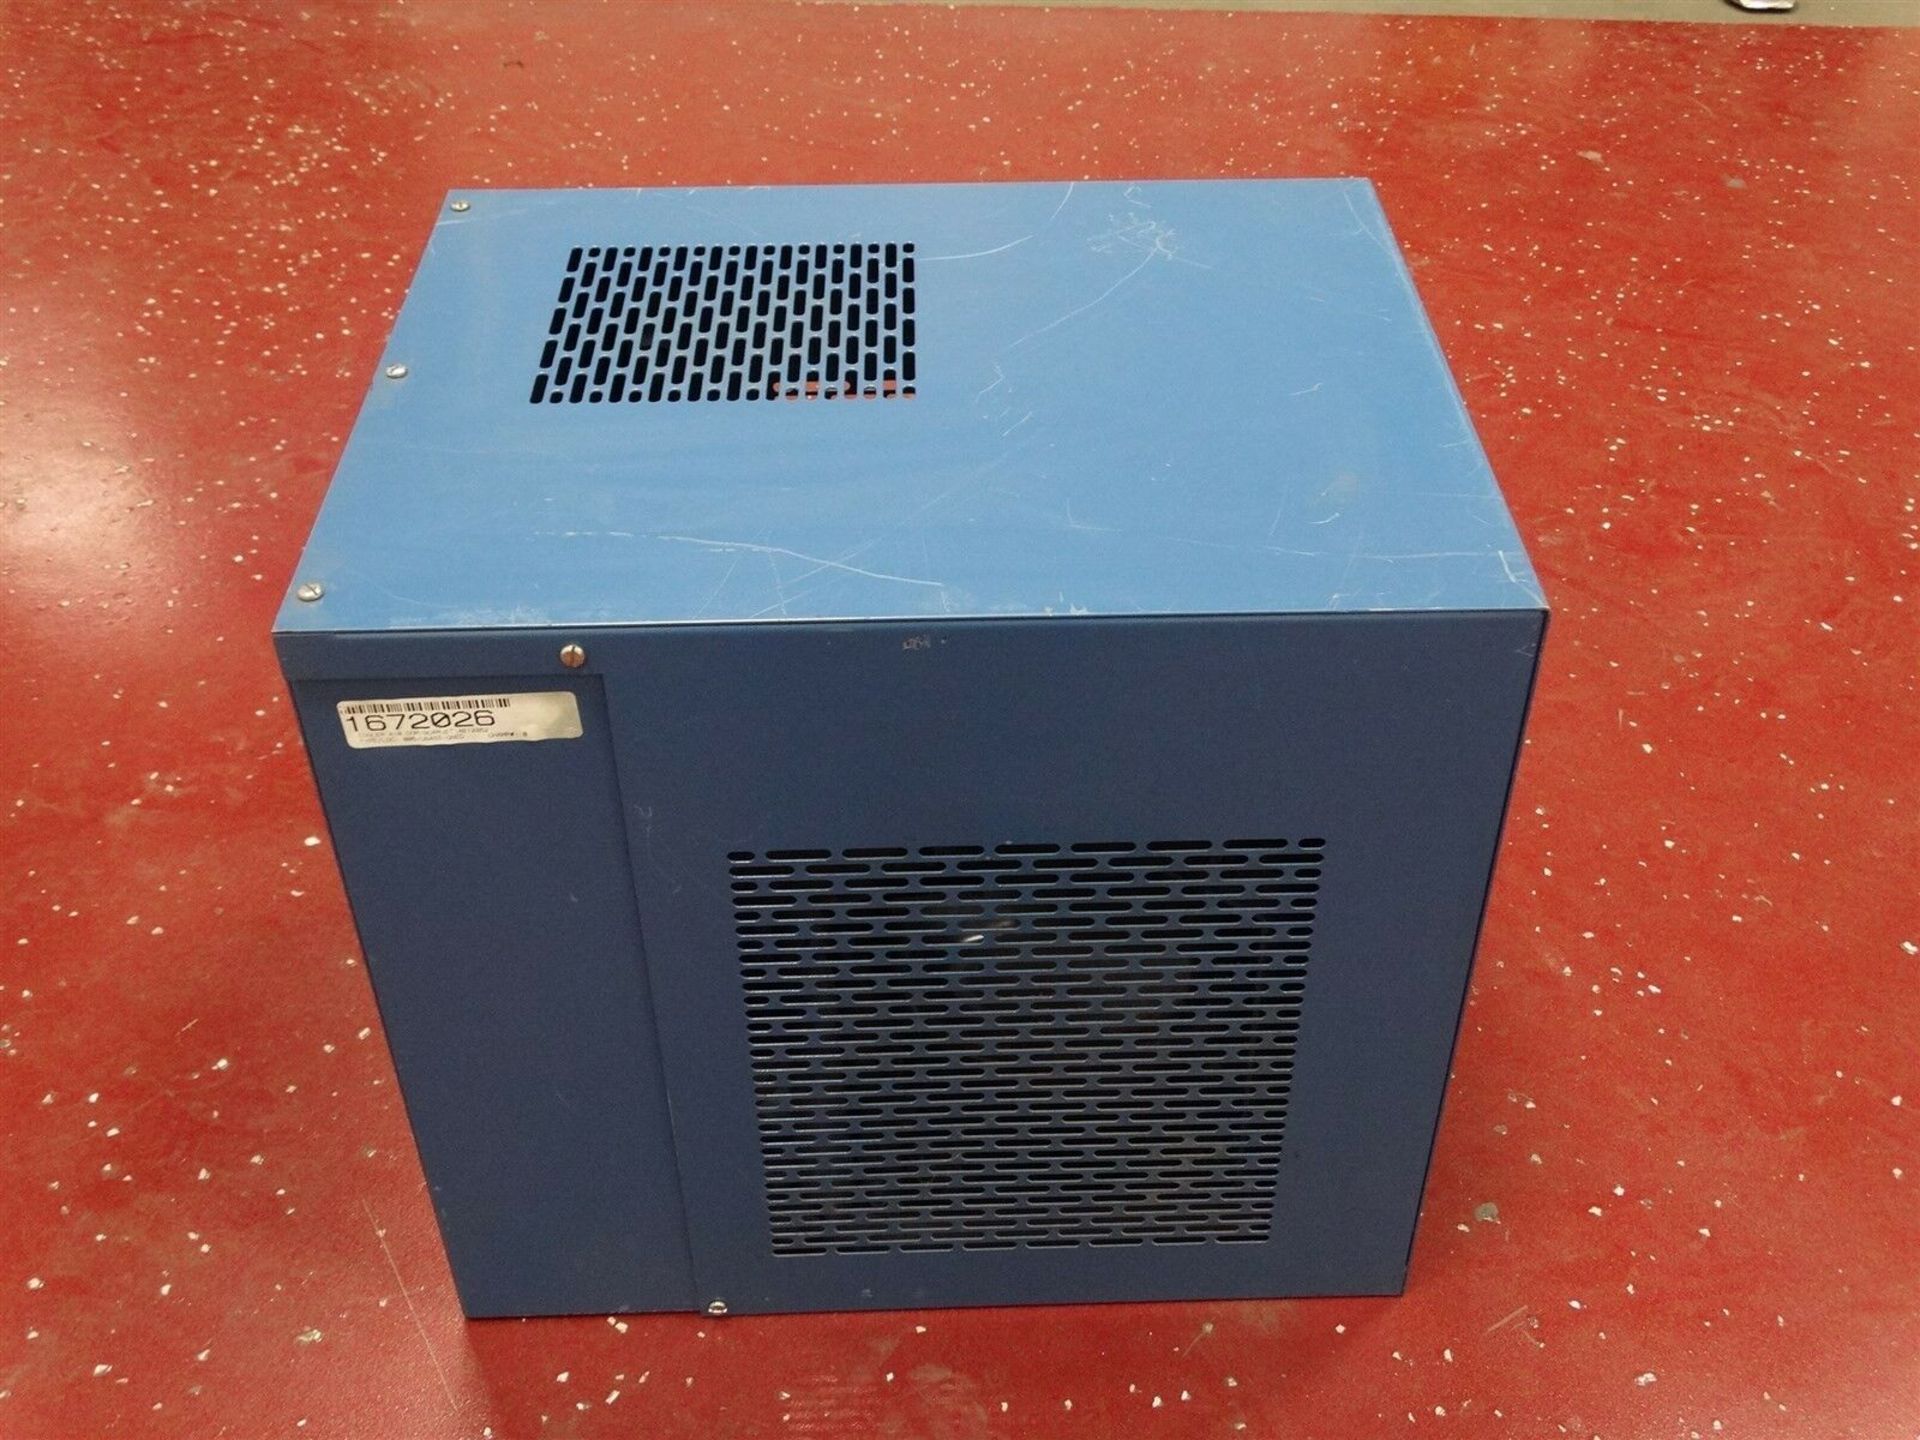 Great Lakes Air Refrigerated Air Dryer GRF-20A-116 Voltage:120/1/60 FLA.4.86A 13309 - Image 10 of 11